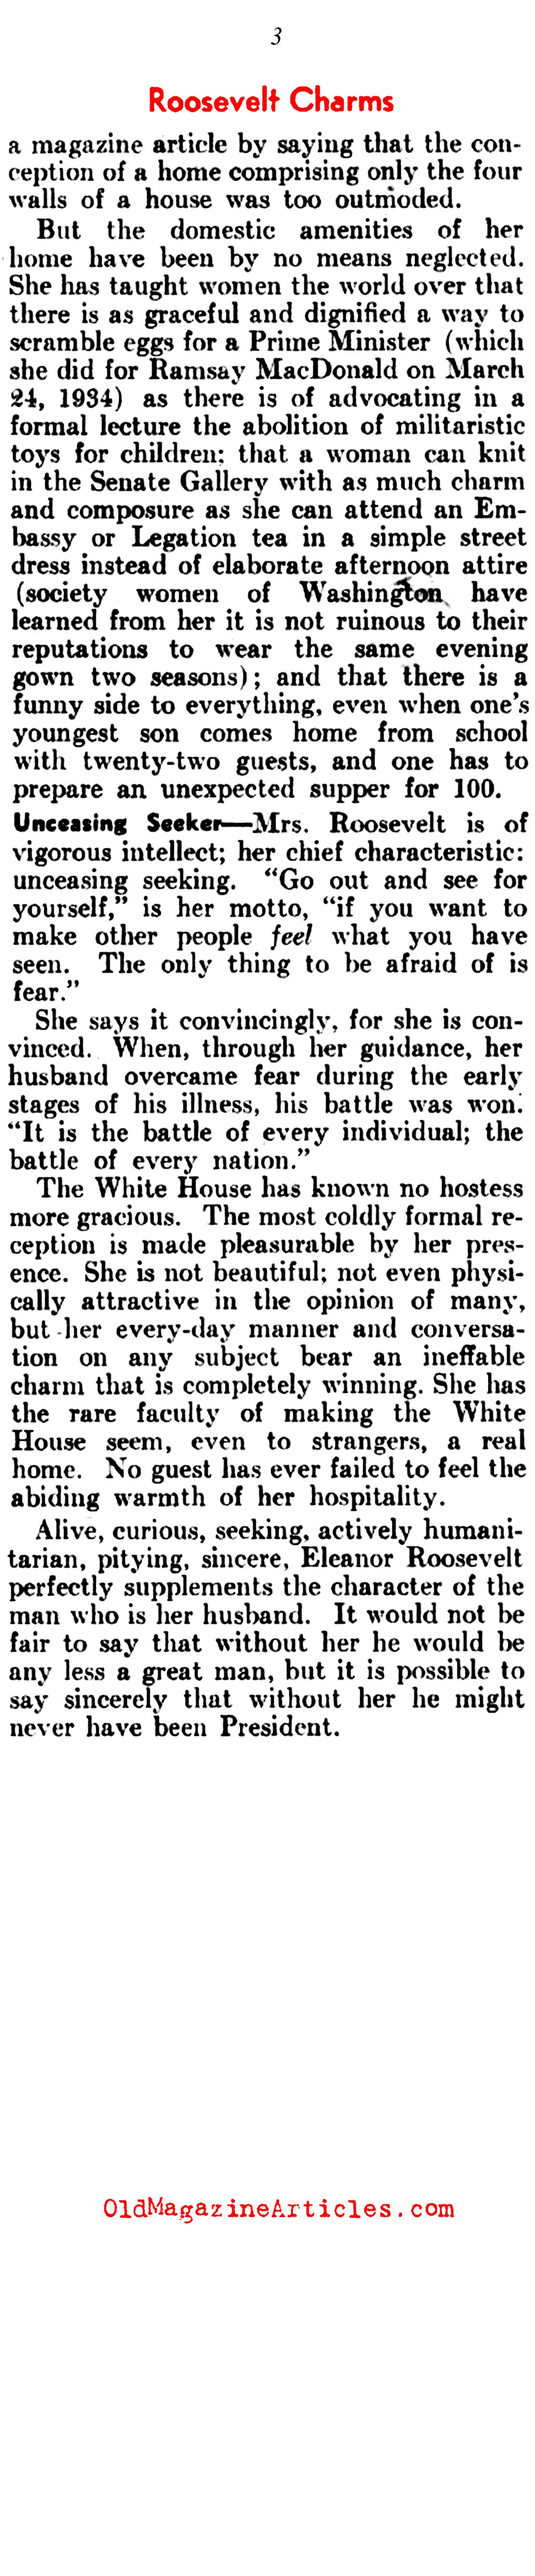 Eleanor Roosevelt and Her Many Firsts (The Literary Digest, 1937)